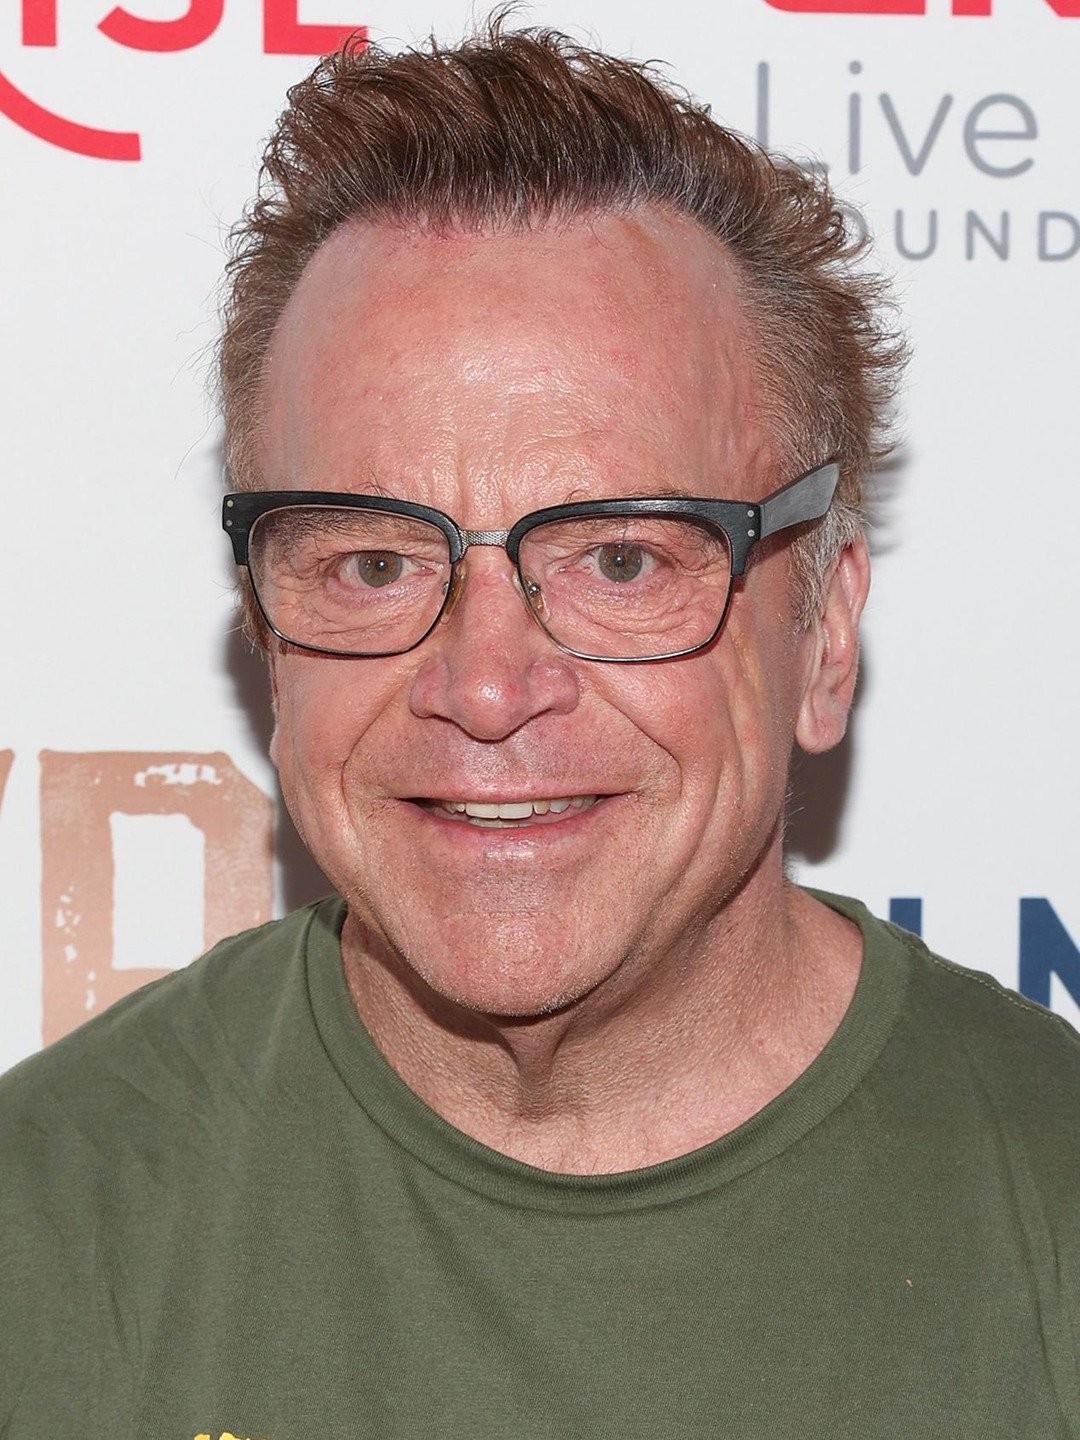 Tom Arnold alive and kicking